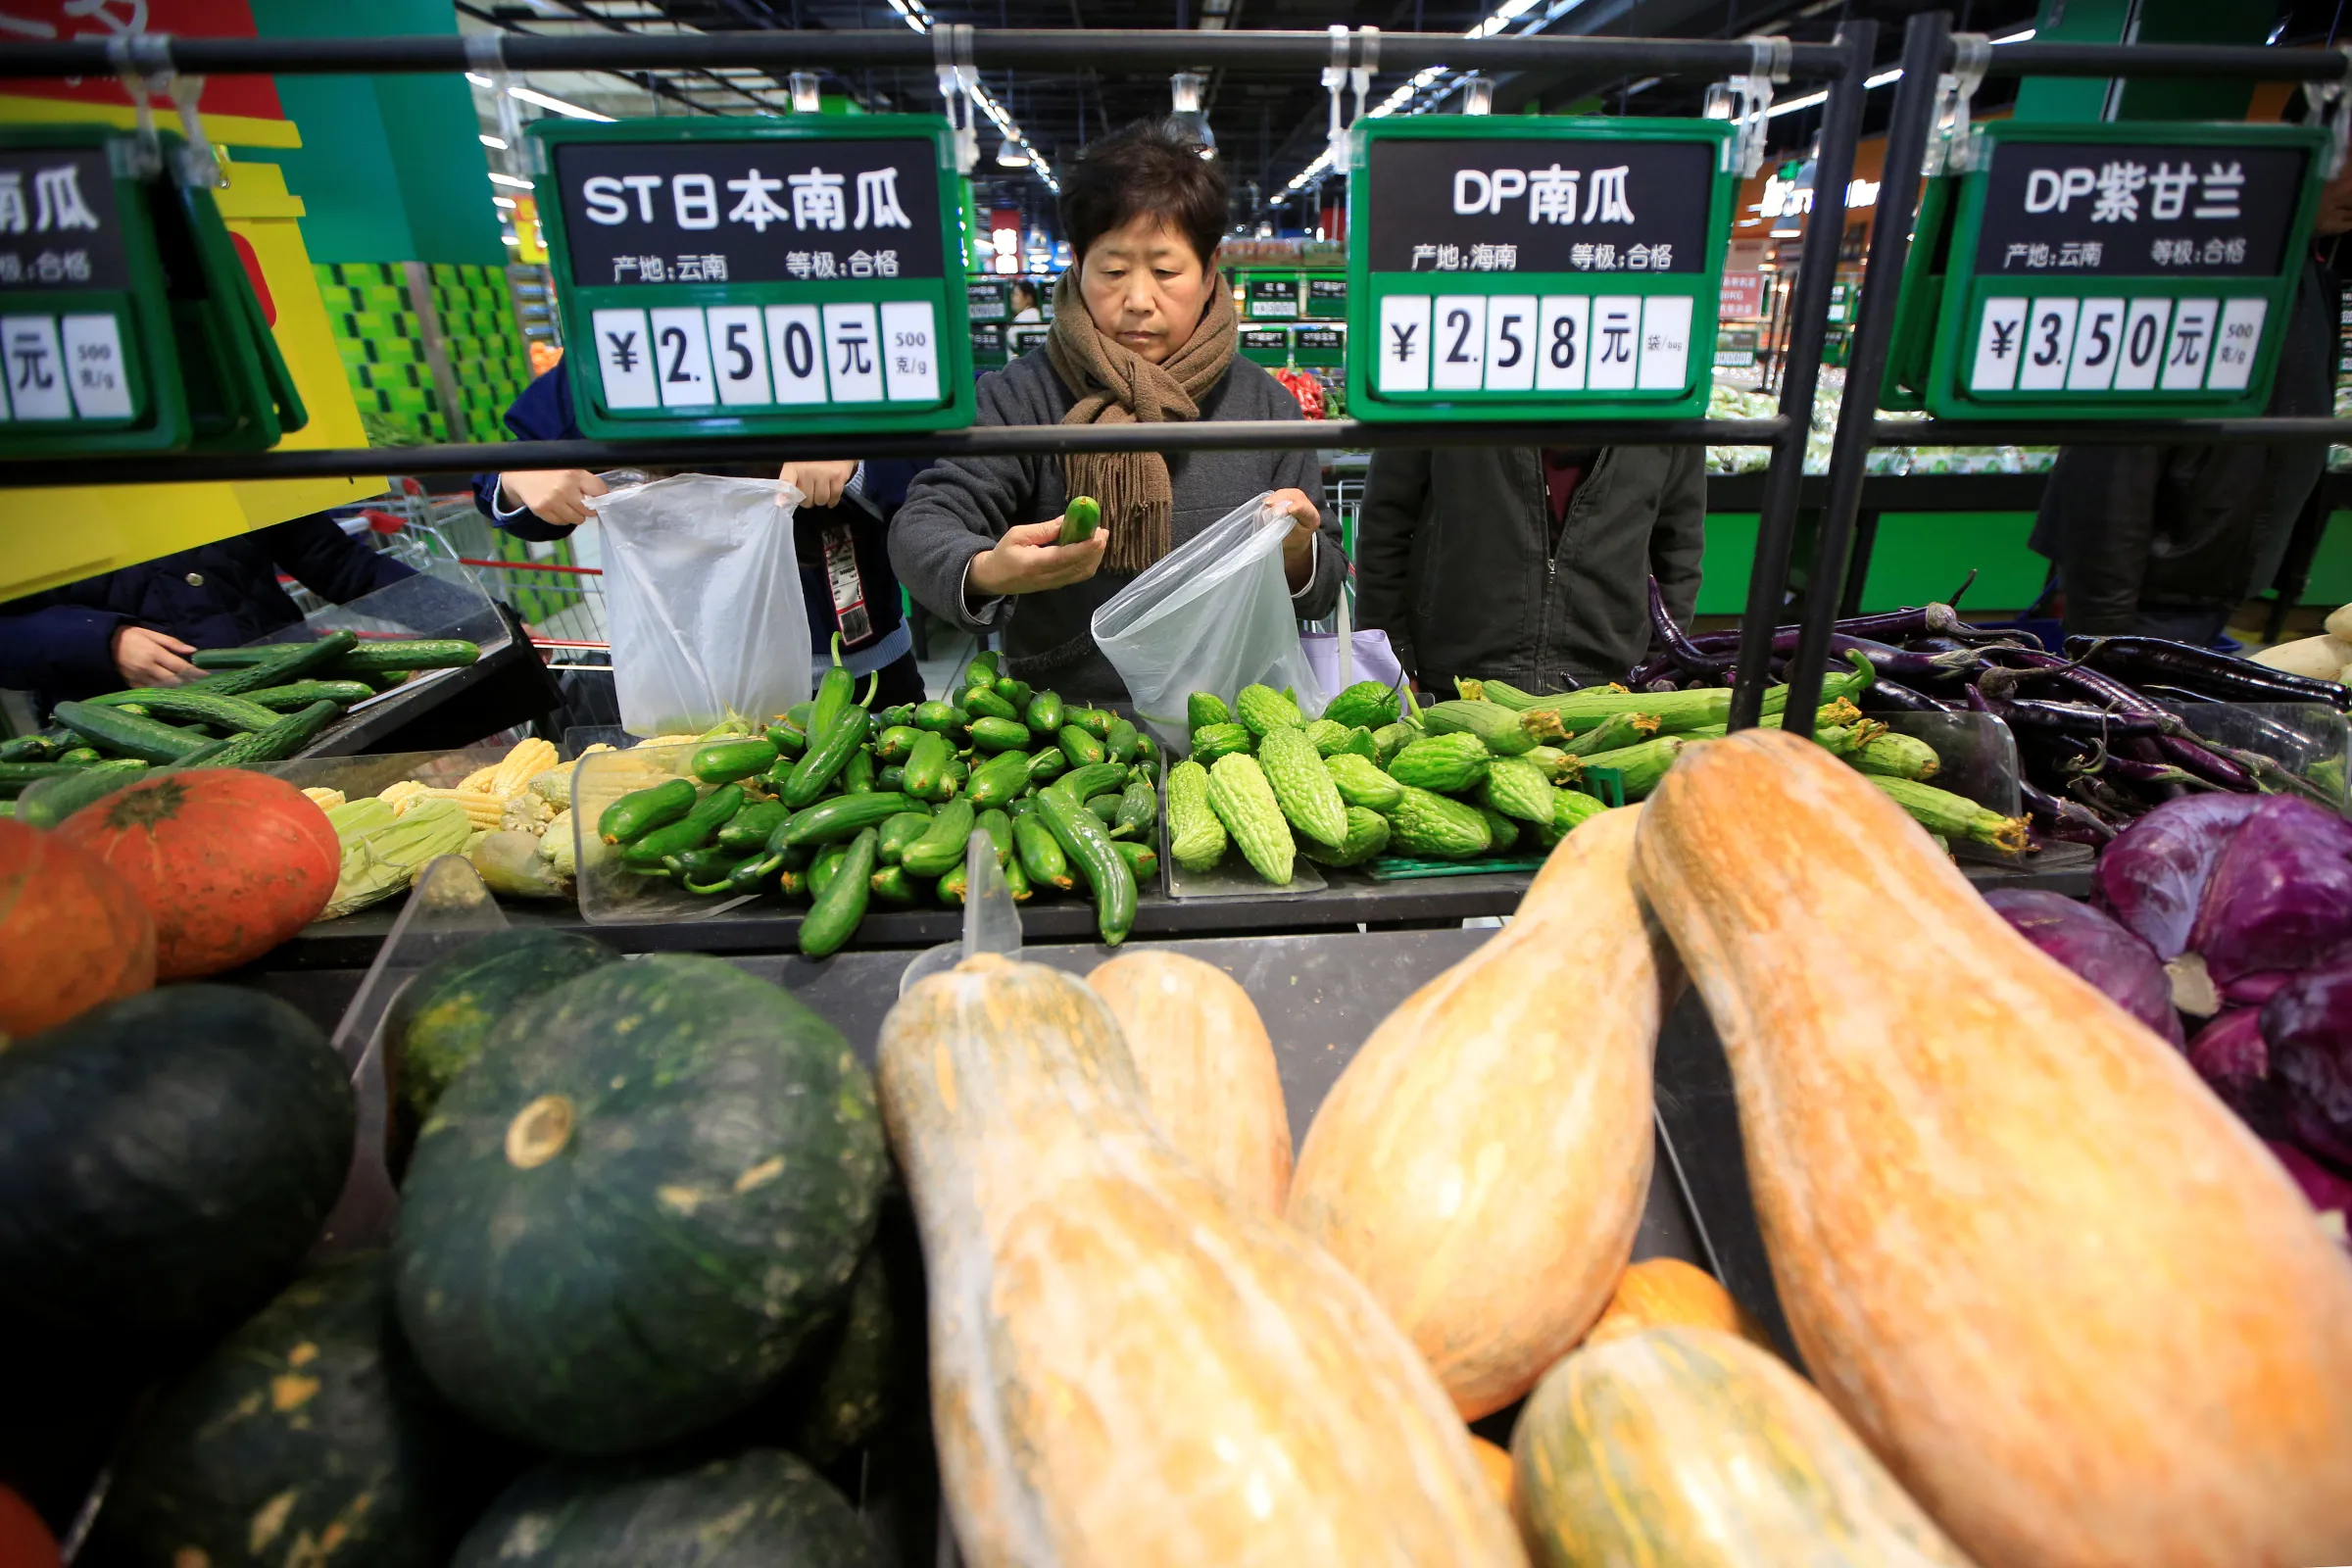 A woman stands holding a plastic bag and a courgette at a vegetable stand